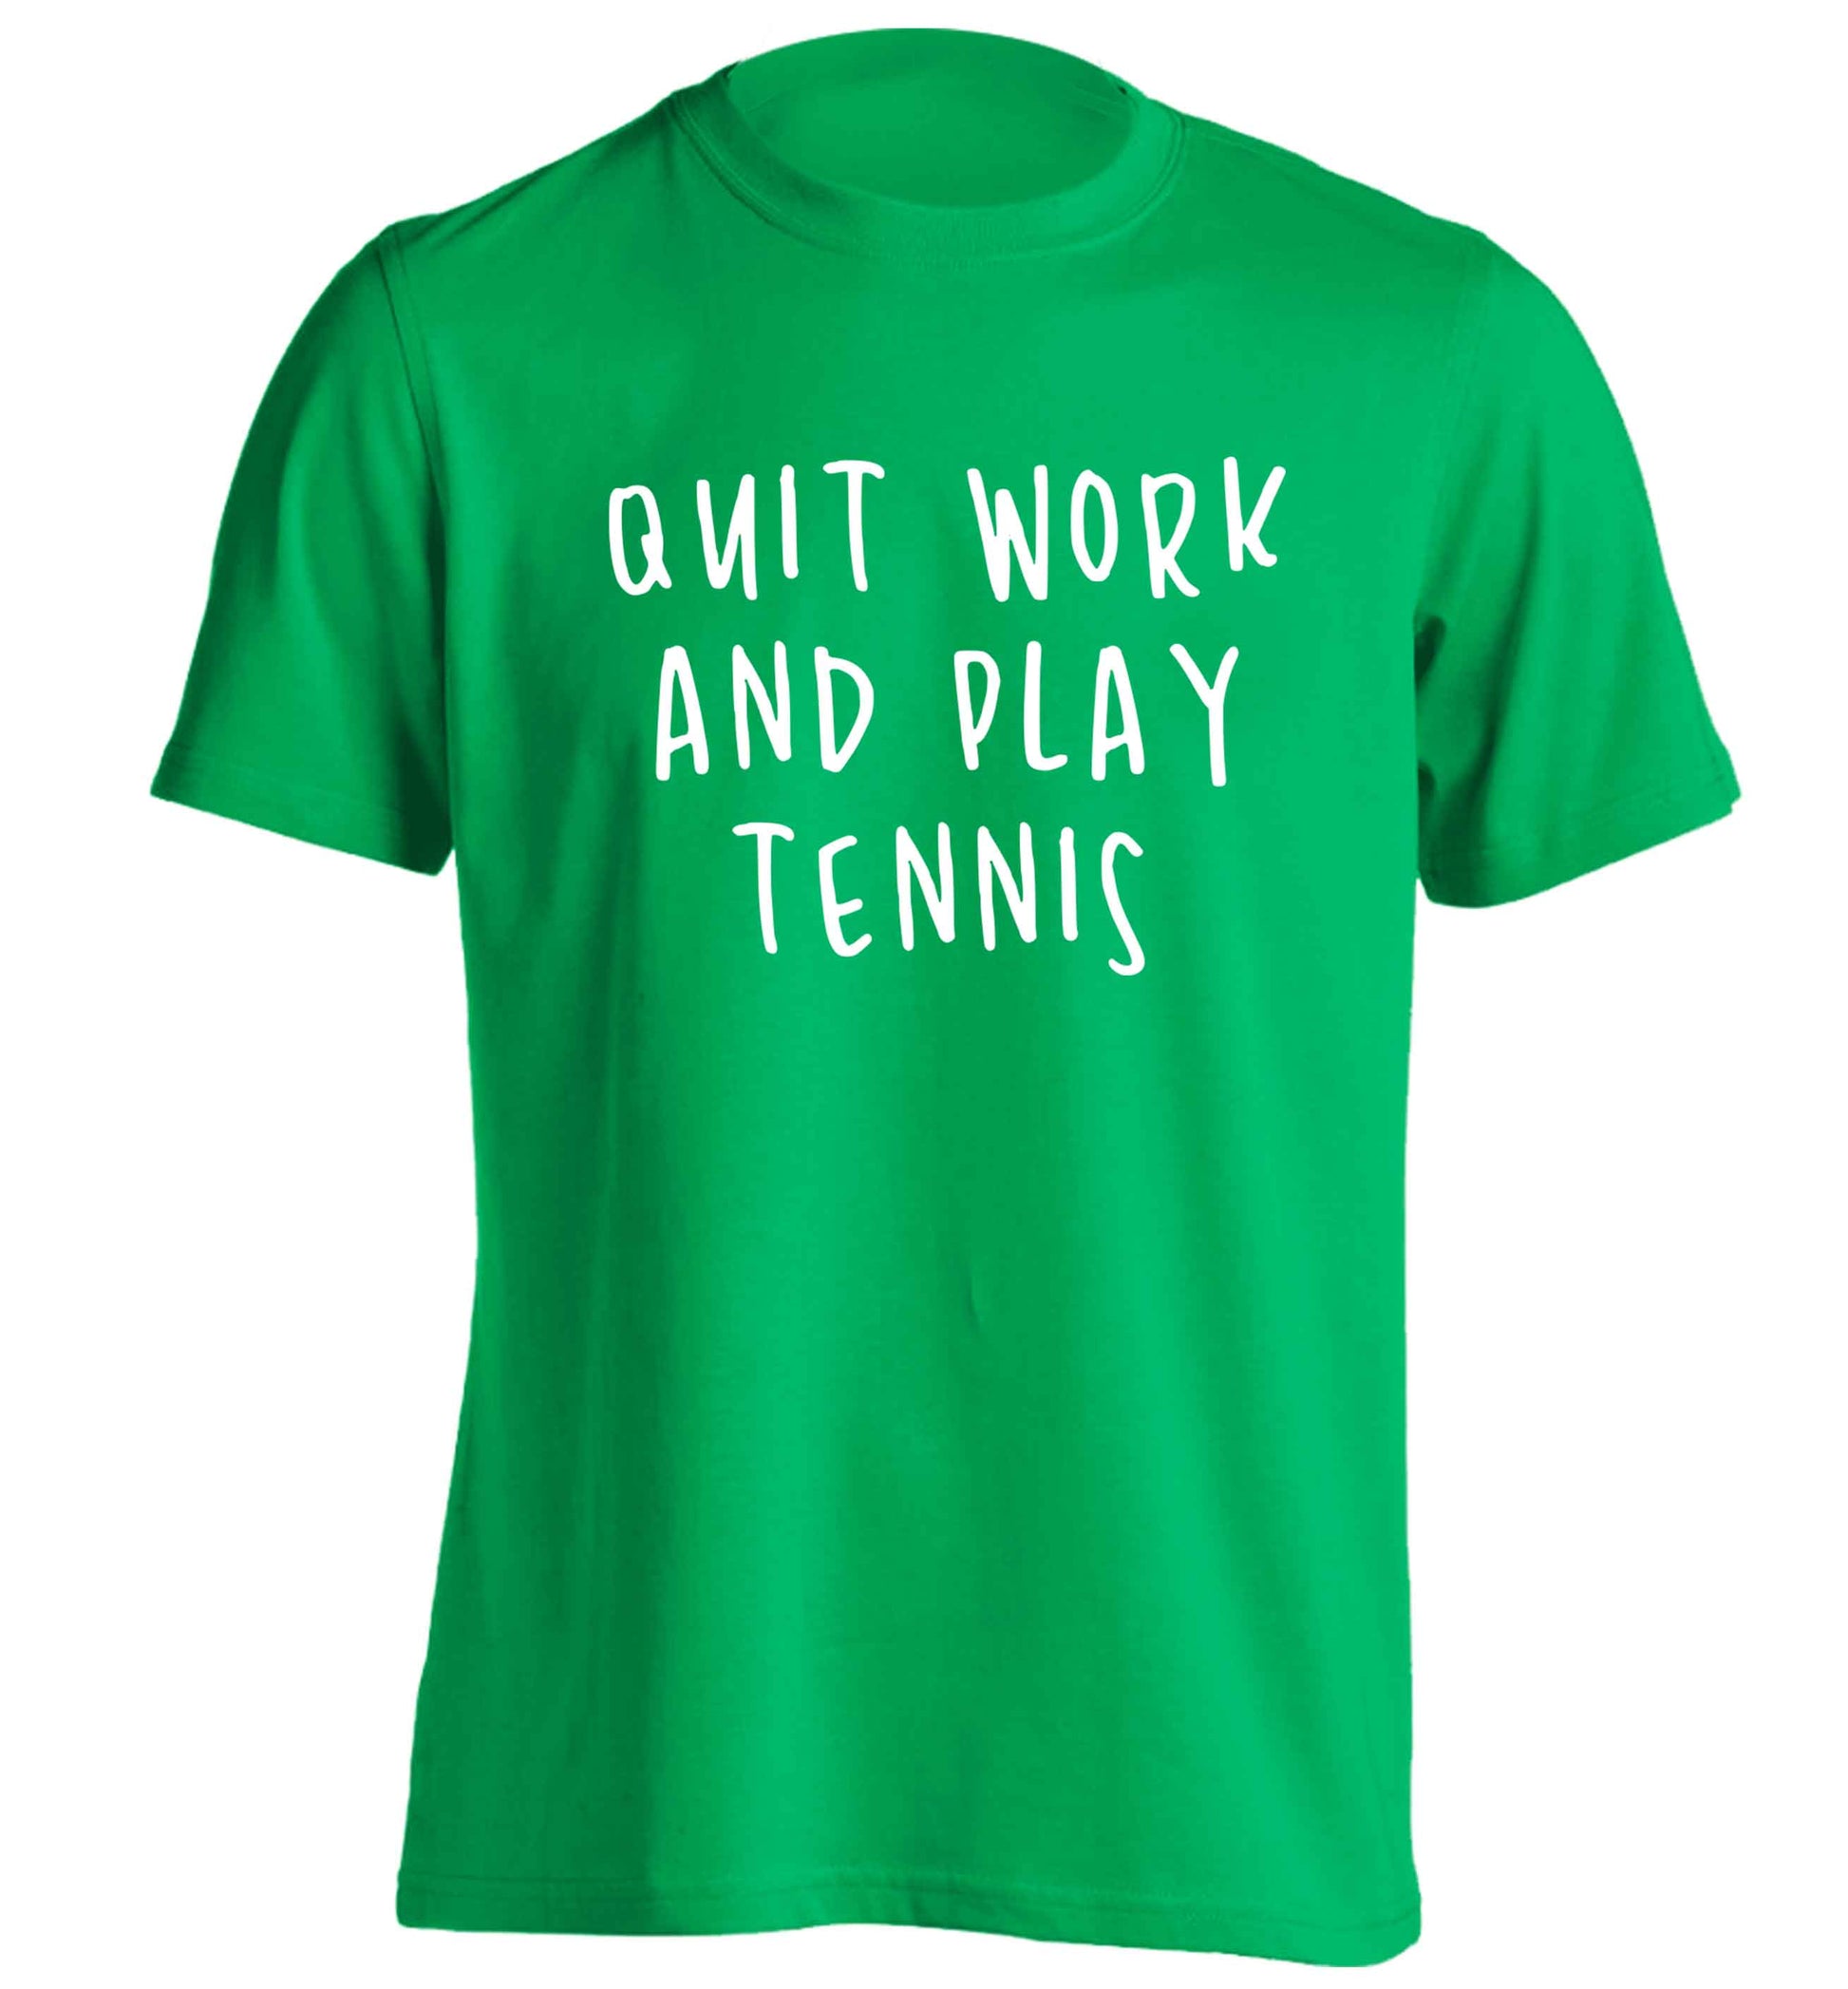 Quit work and play tennis adults unisex green Tshirt 2XL